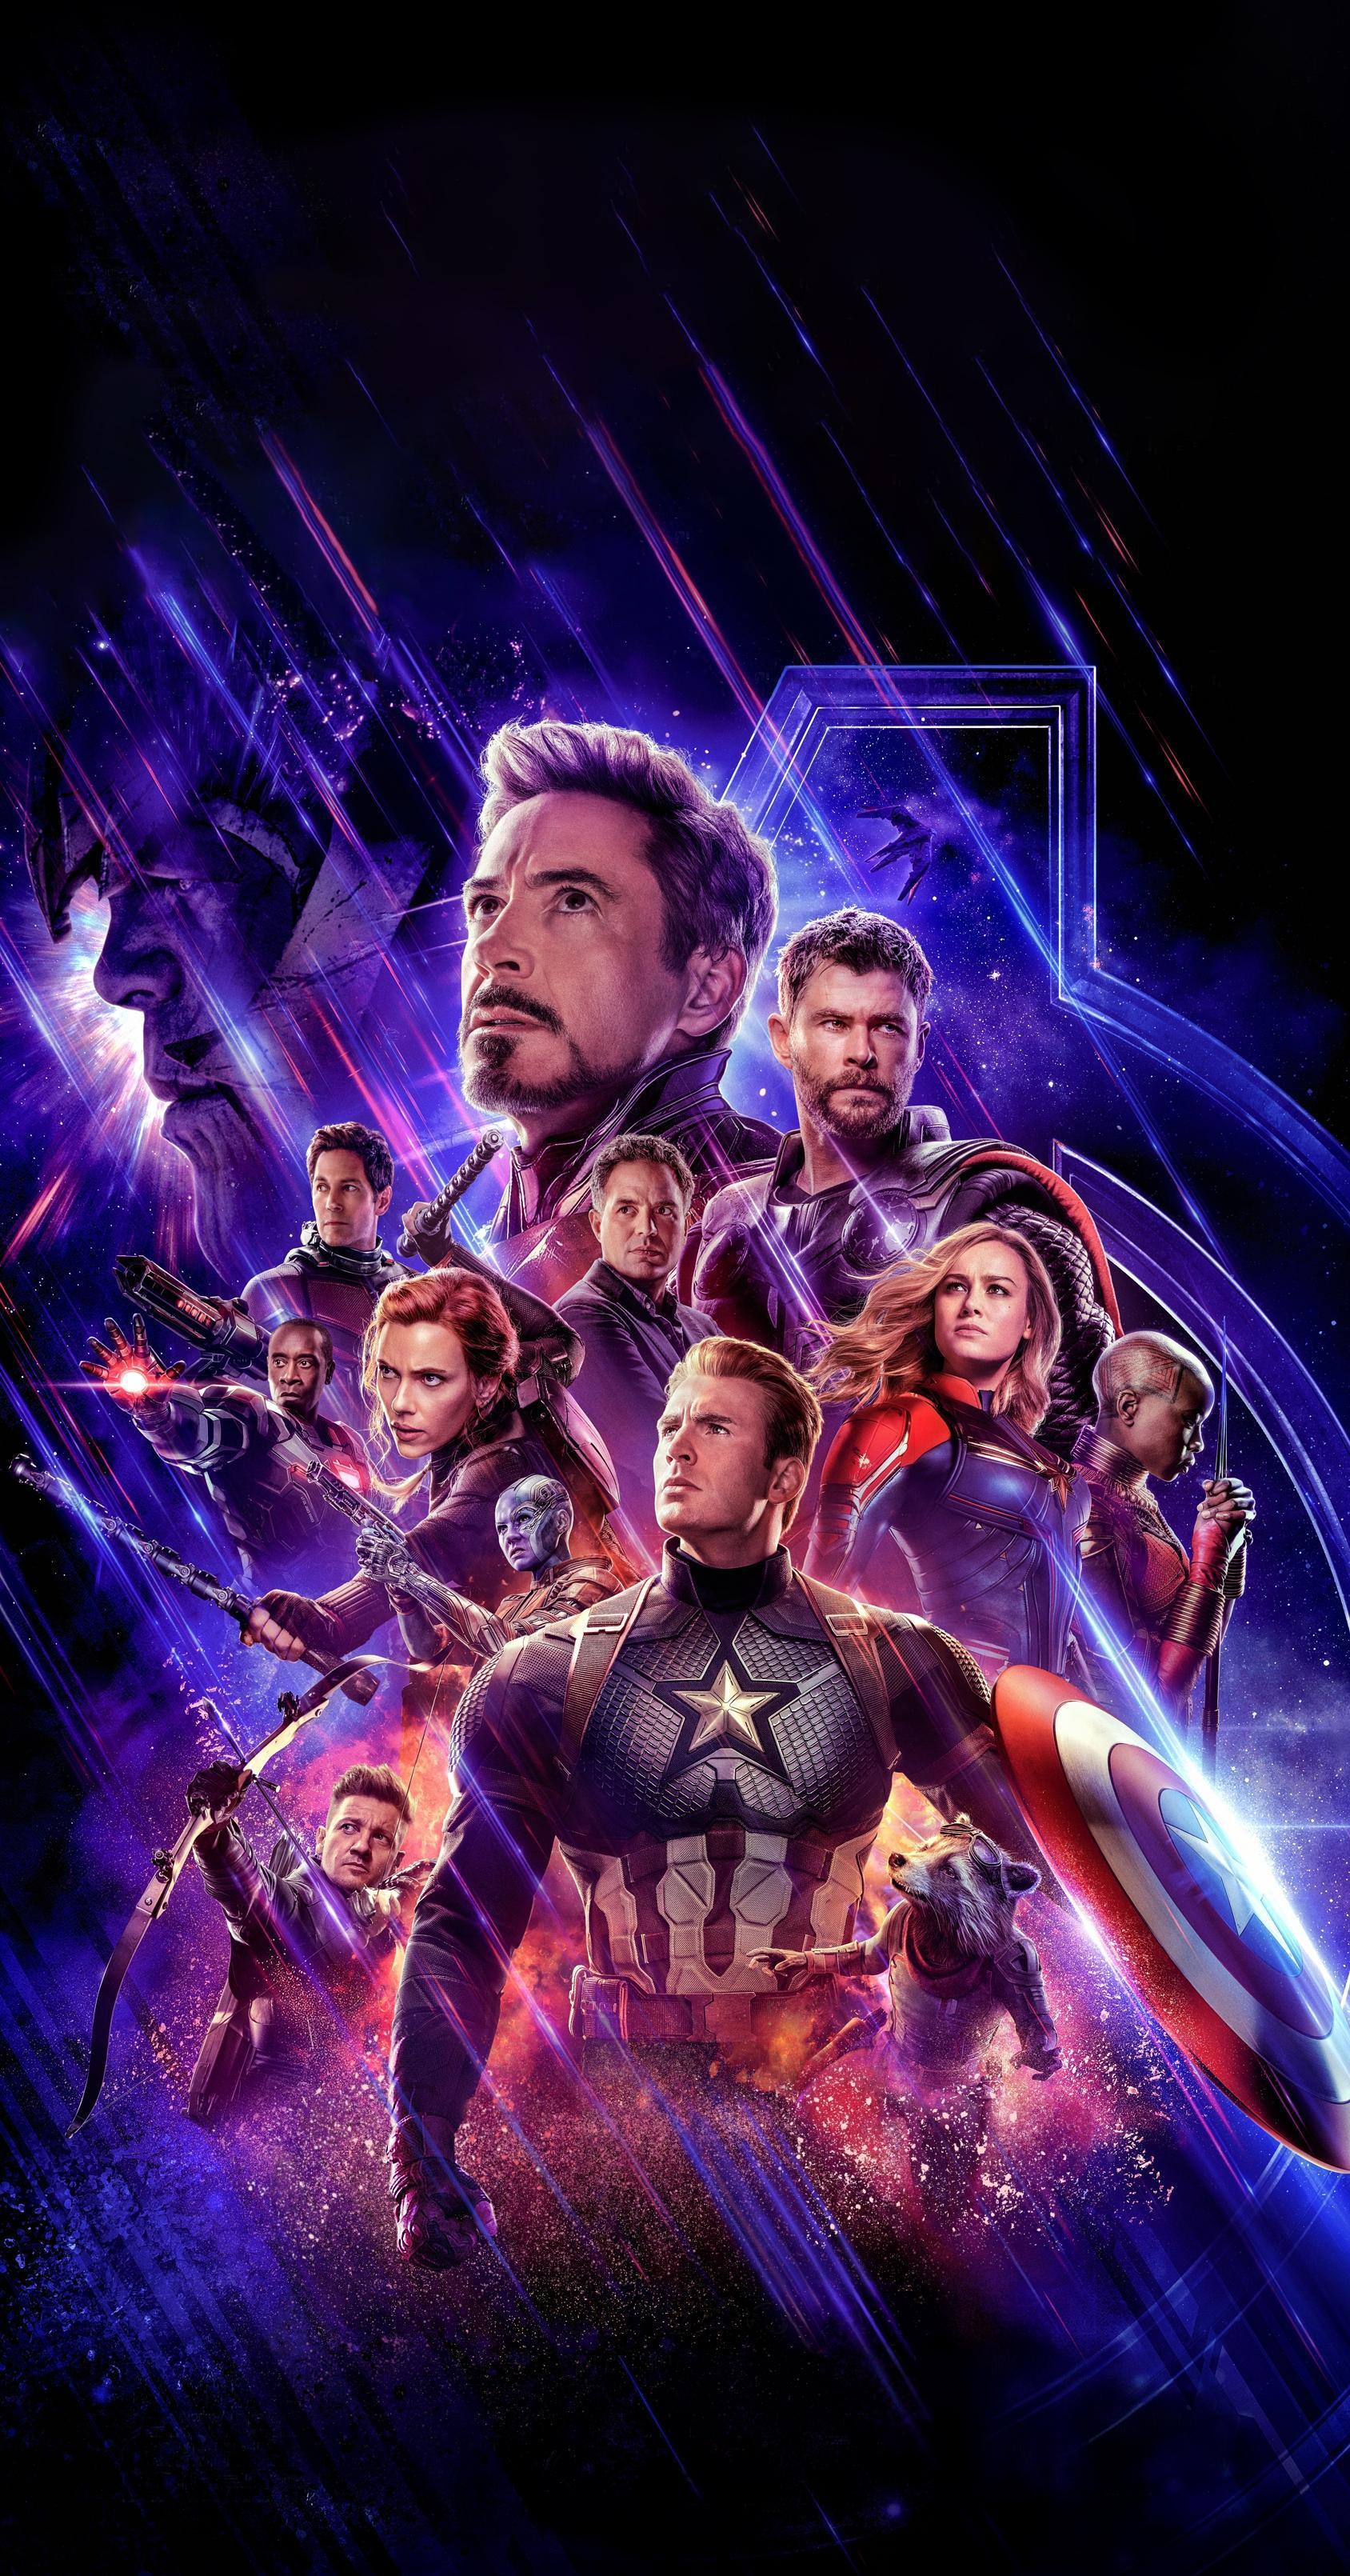 Textless Avengers: Endgame poster with an extended top for phone